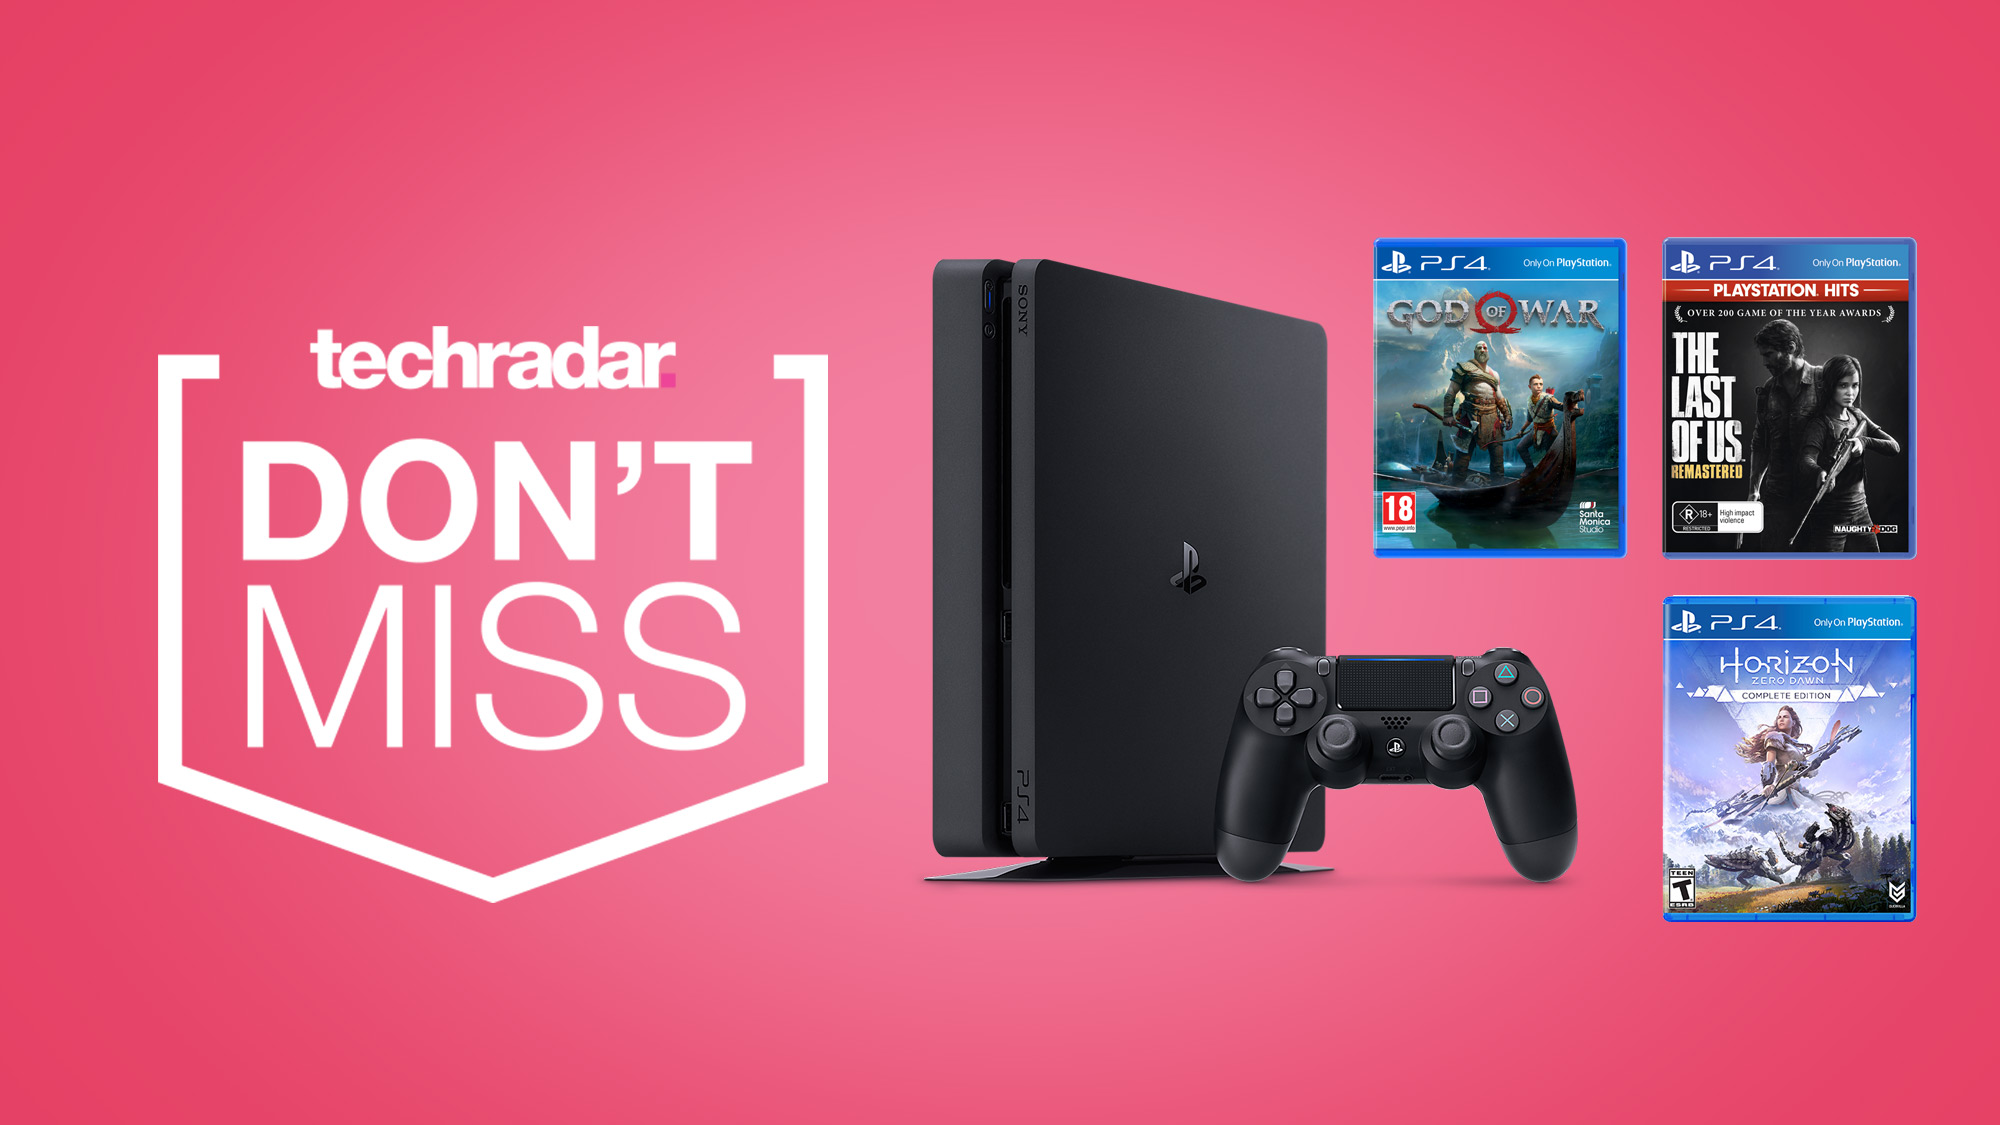 playstation 4 console under $200